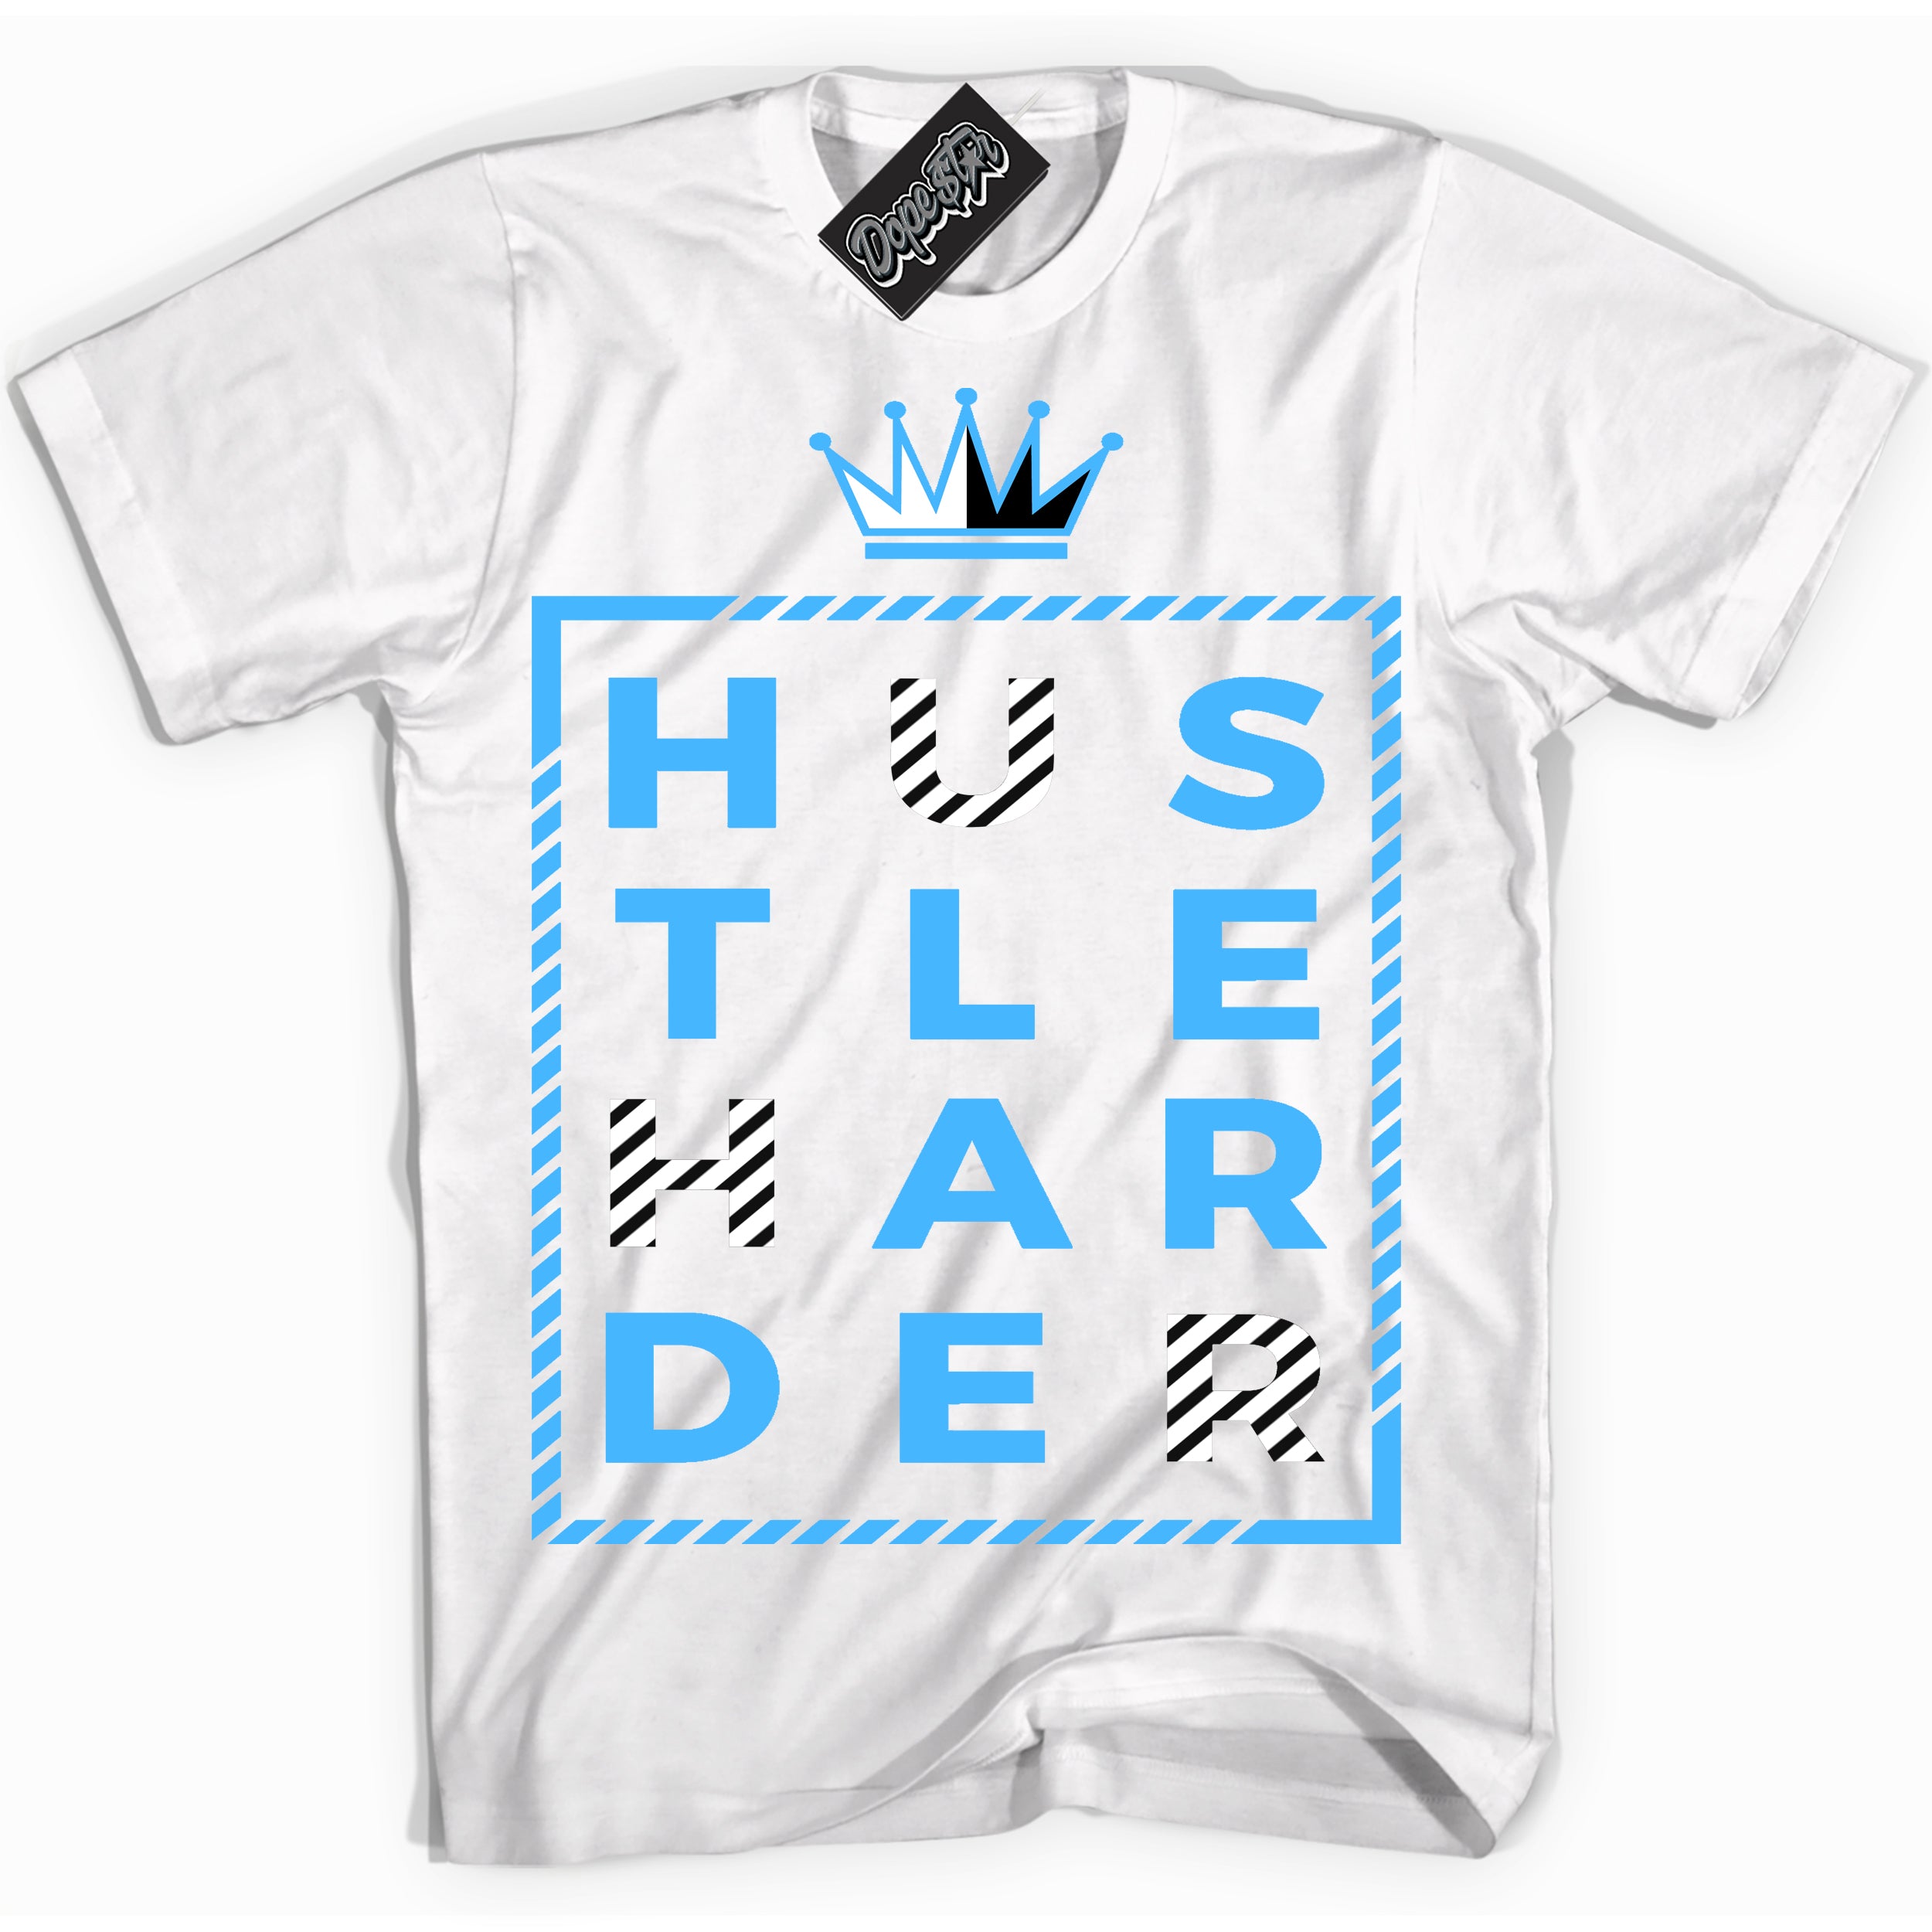 Cool White graphic tee with “ Hustle Harder ” design, that perfectly matches Powder Blue 9s sneakers 